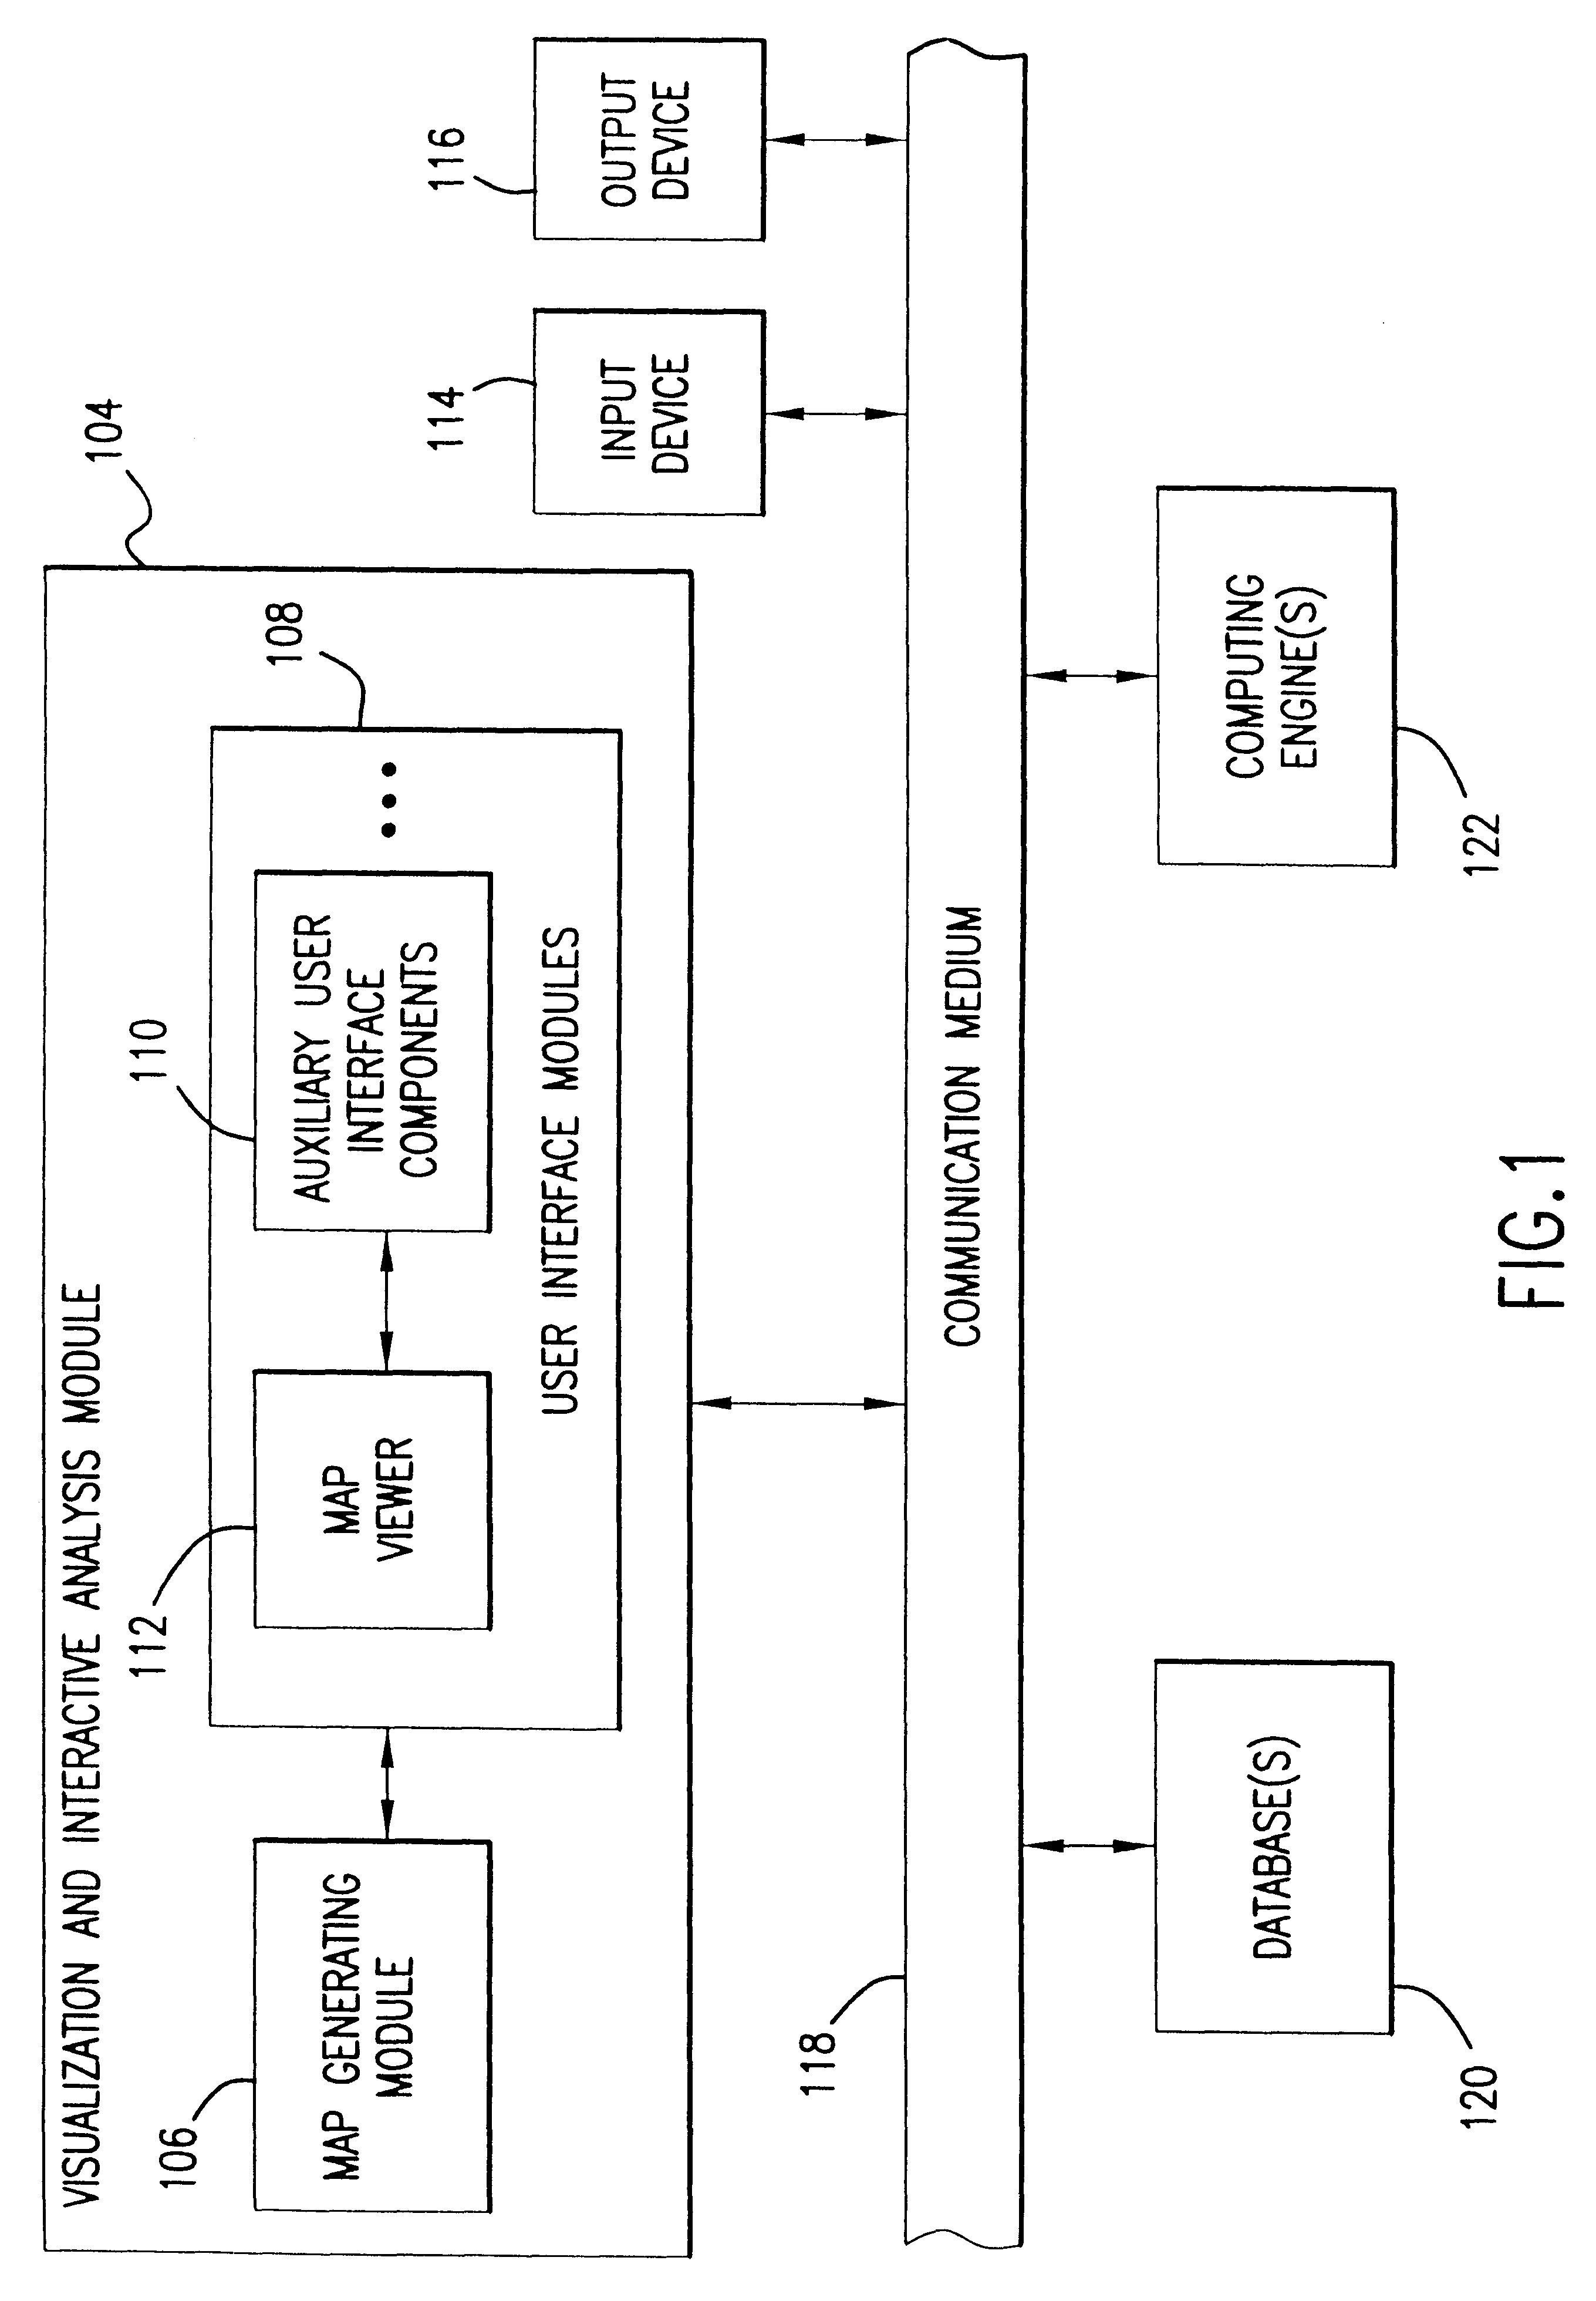 System, method, and computer program product for representing proximity data in a multi-dimensional space